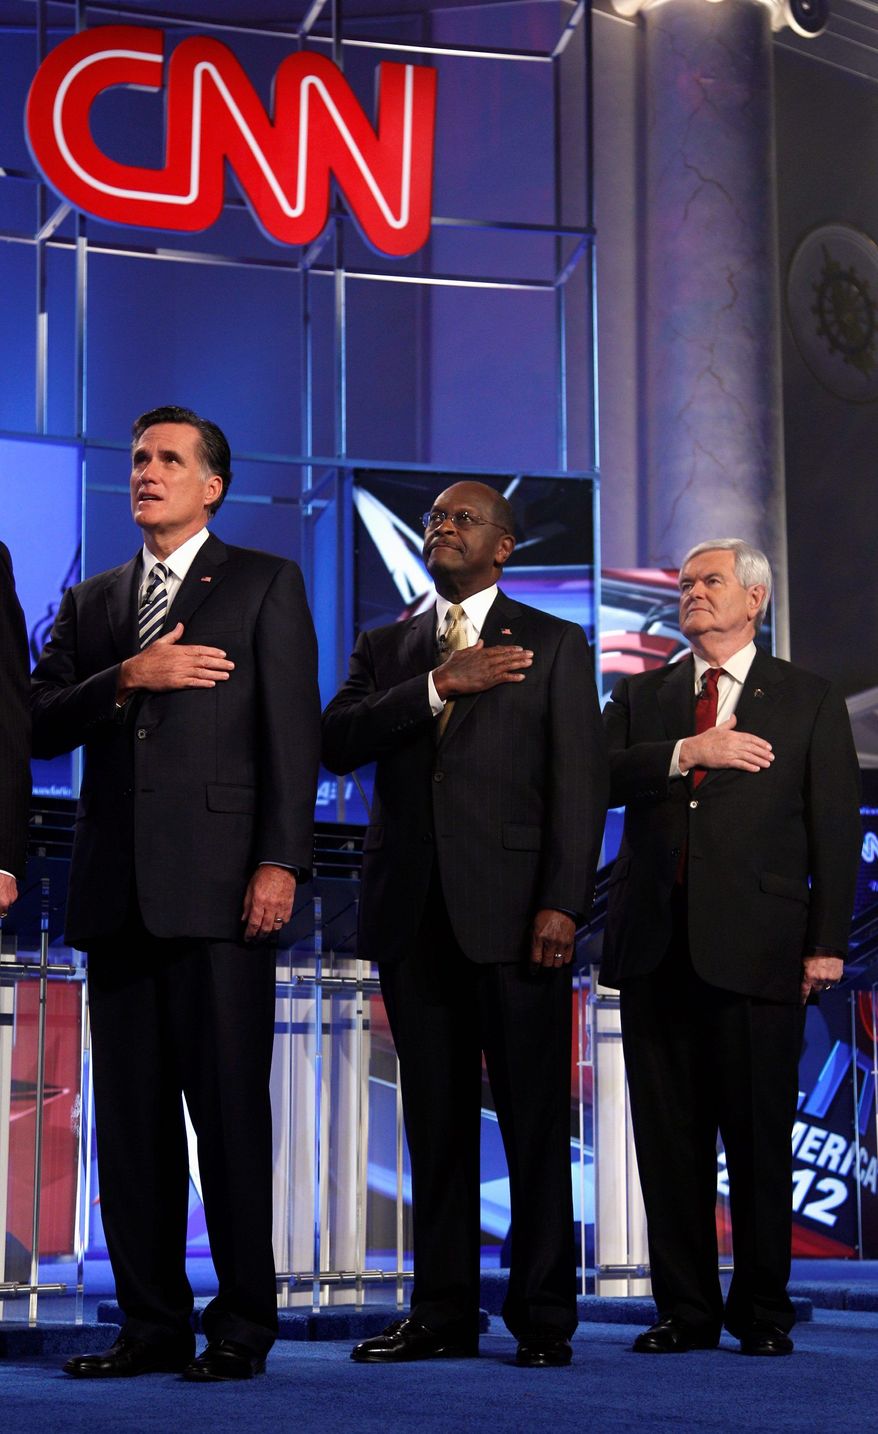 To become the GOP standard-bearer, Mr. Santorum must leapfrog past rivals (from left) Mitt Romney, Herman Cain and Newt Gingrich. (Associated Press)